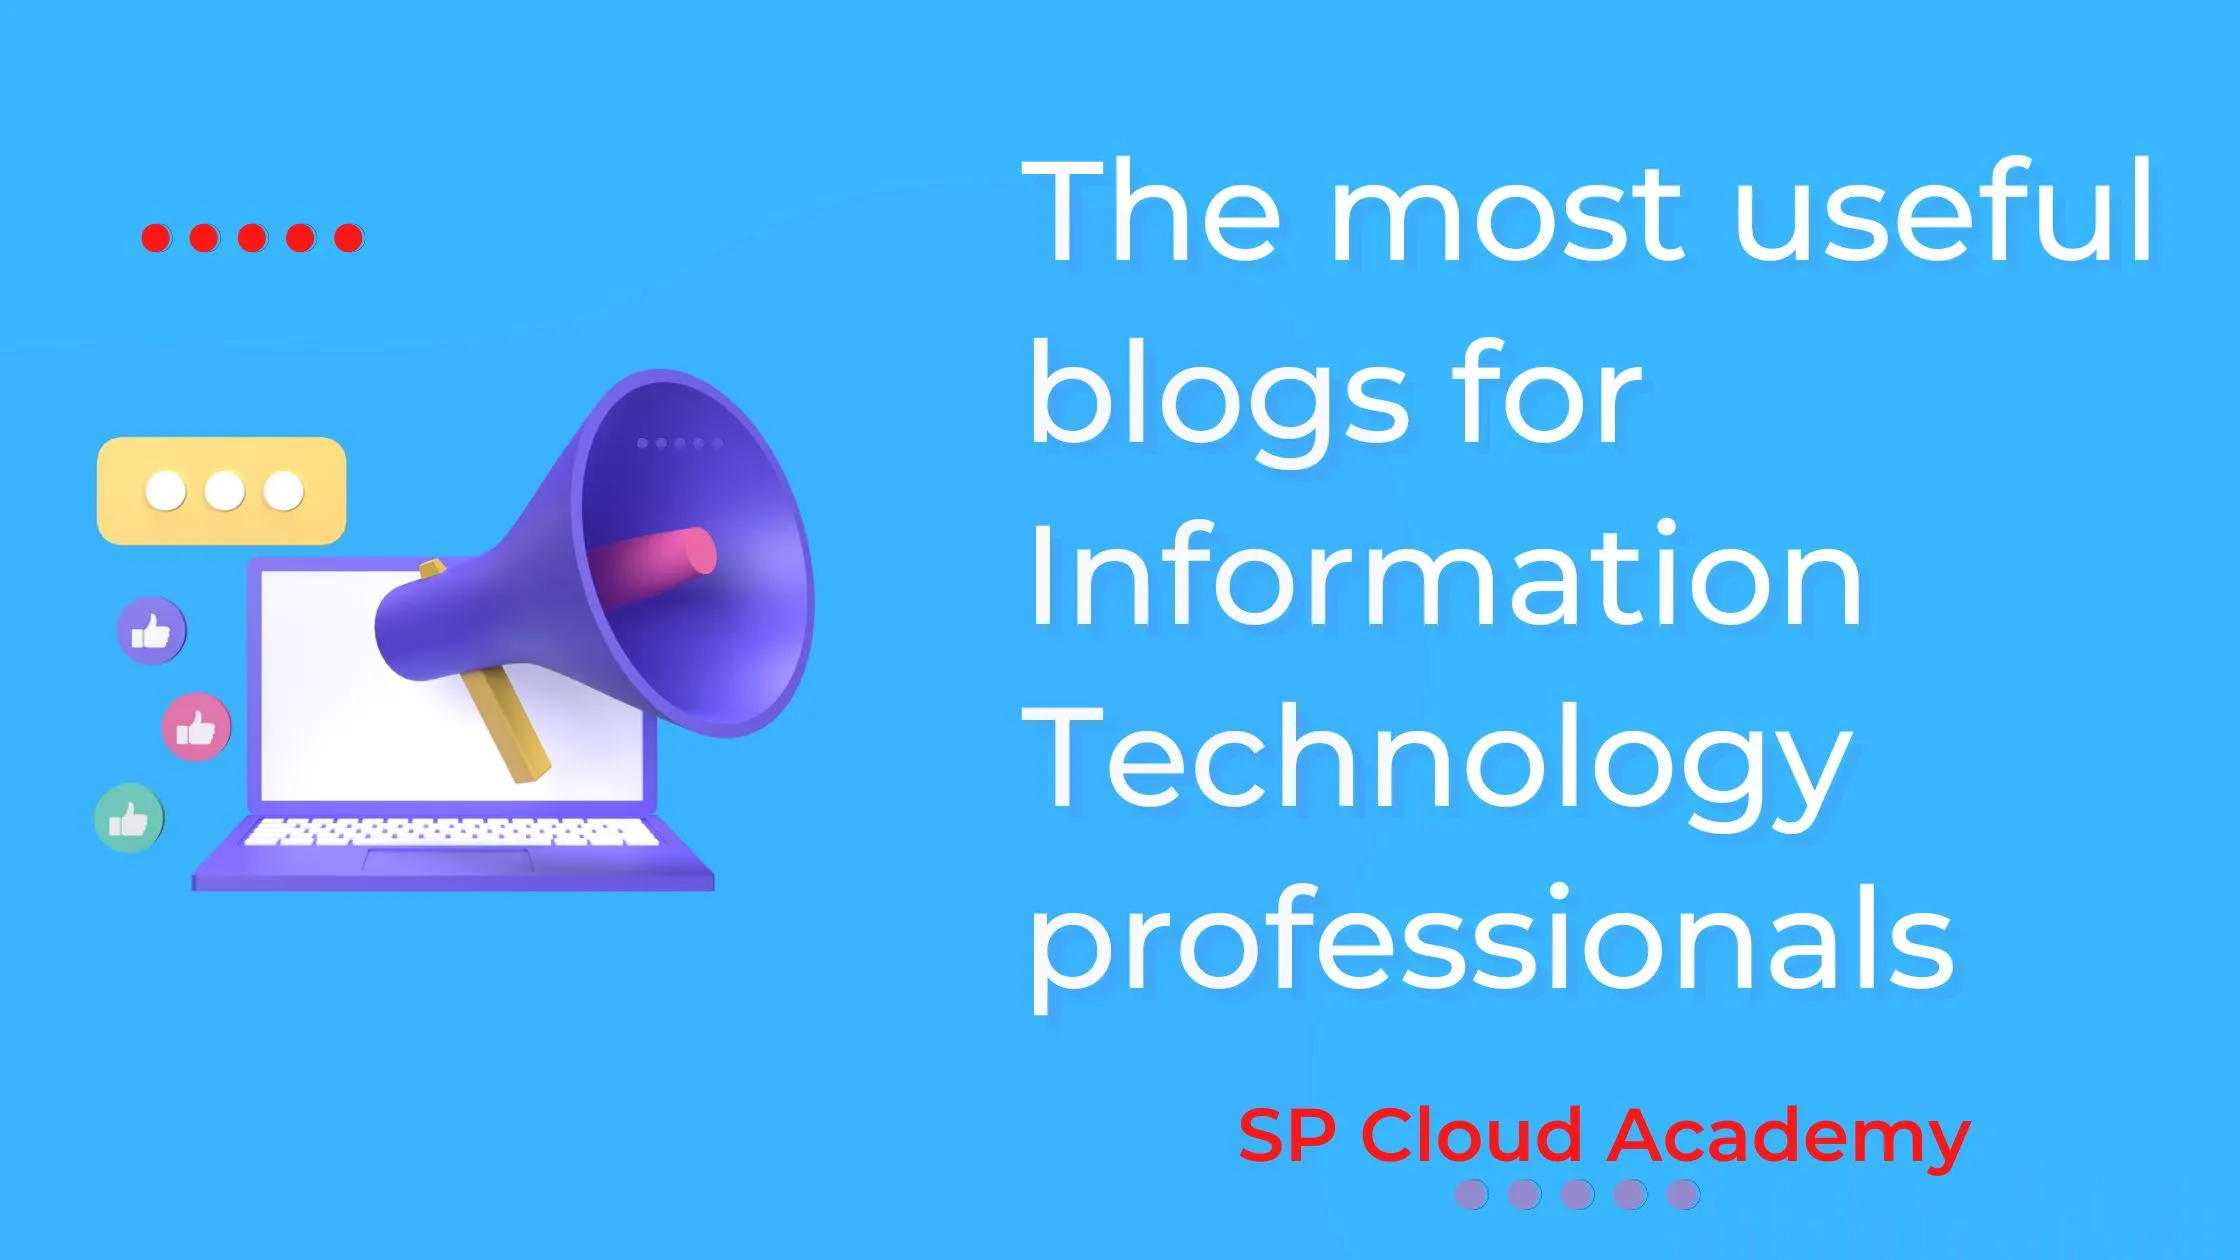 Useful blogs in Information Technology